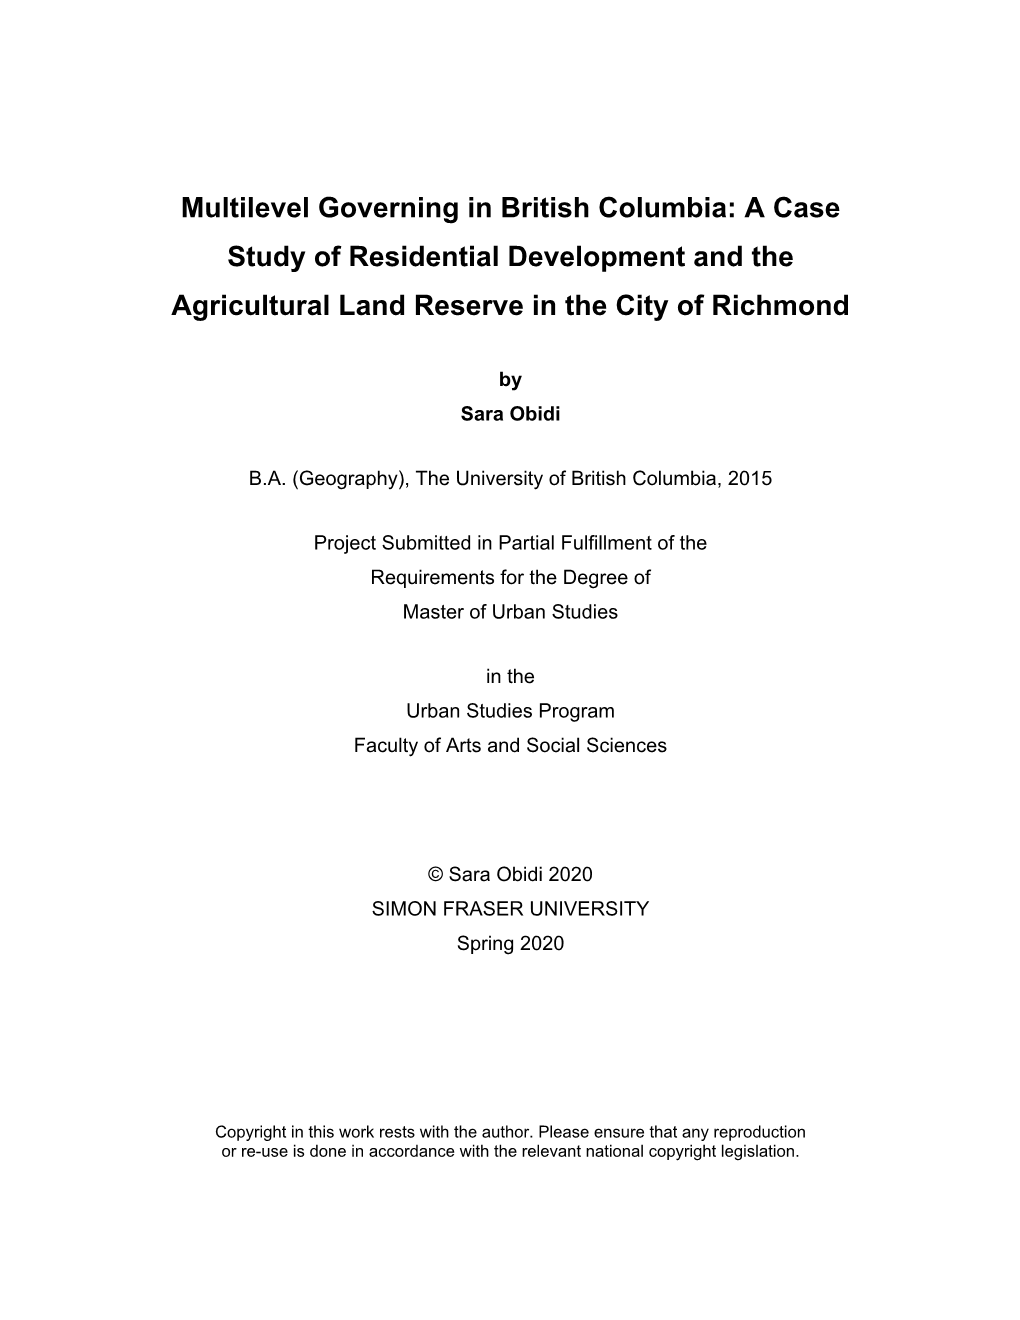 Multilevel Governing in British Columbia: a Case Study of Residential Development and the Agricultural Land Reserve in the City of Richmond